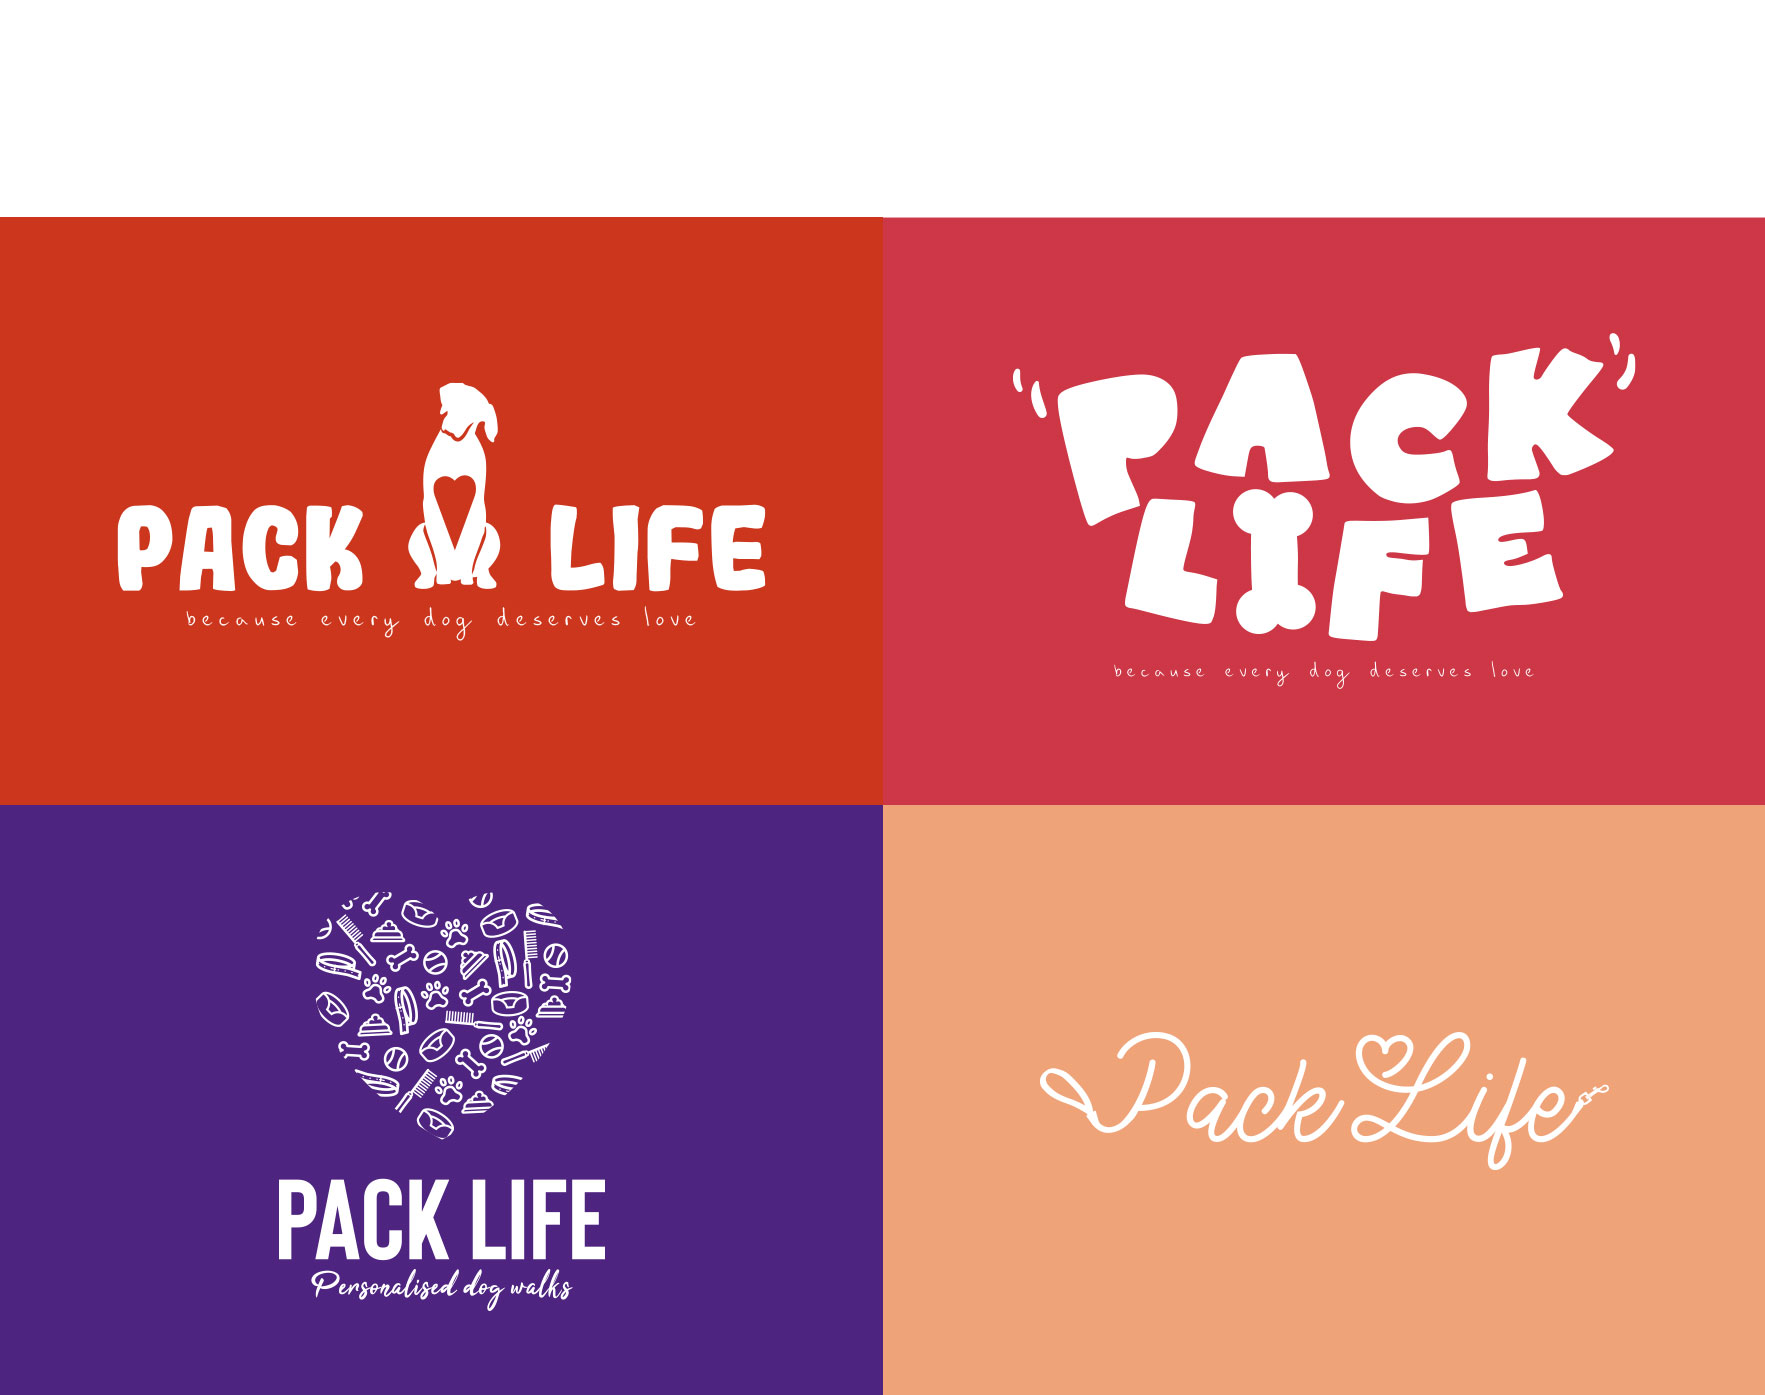 Packlife-concepts